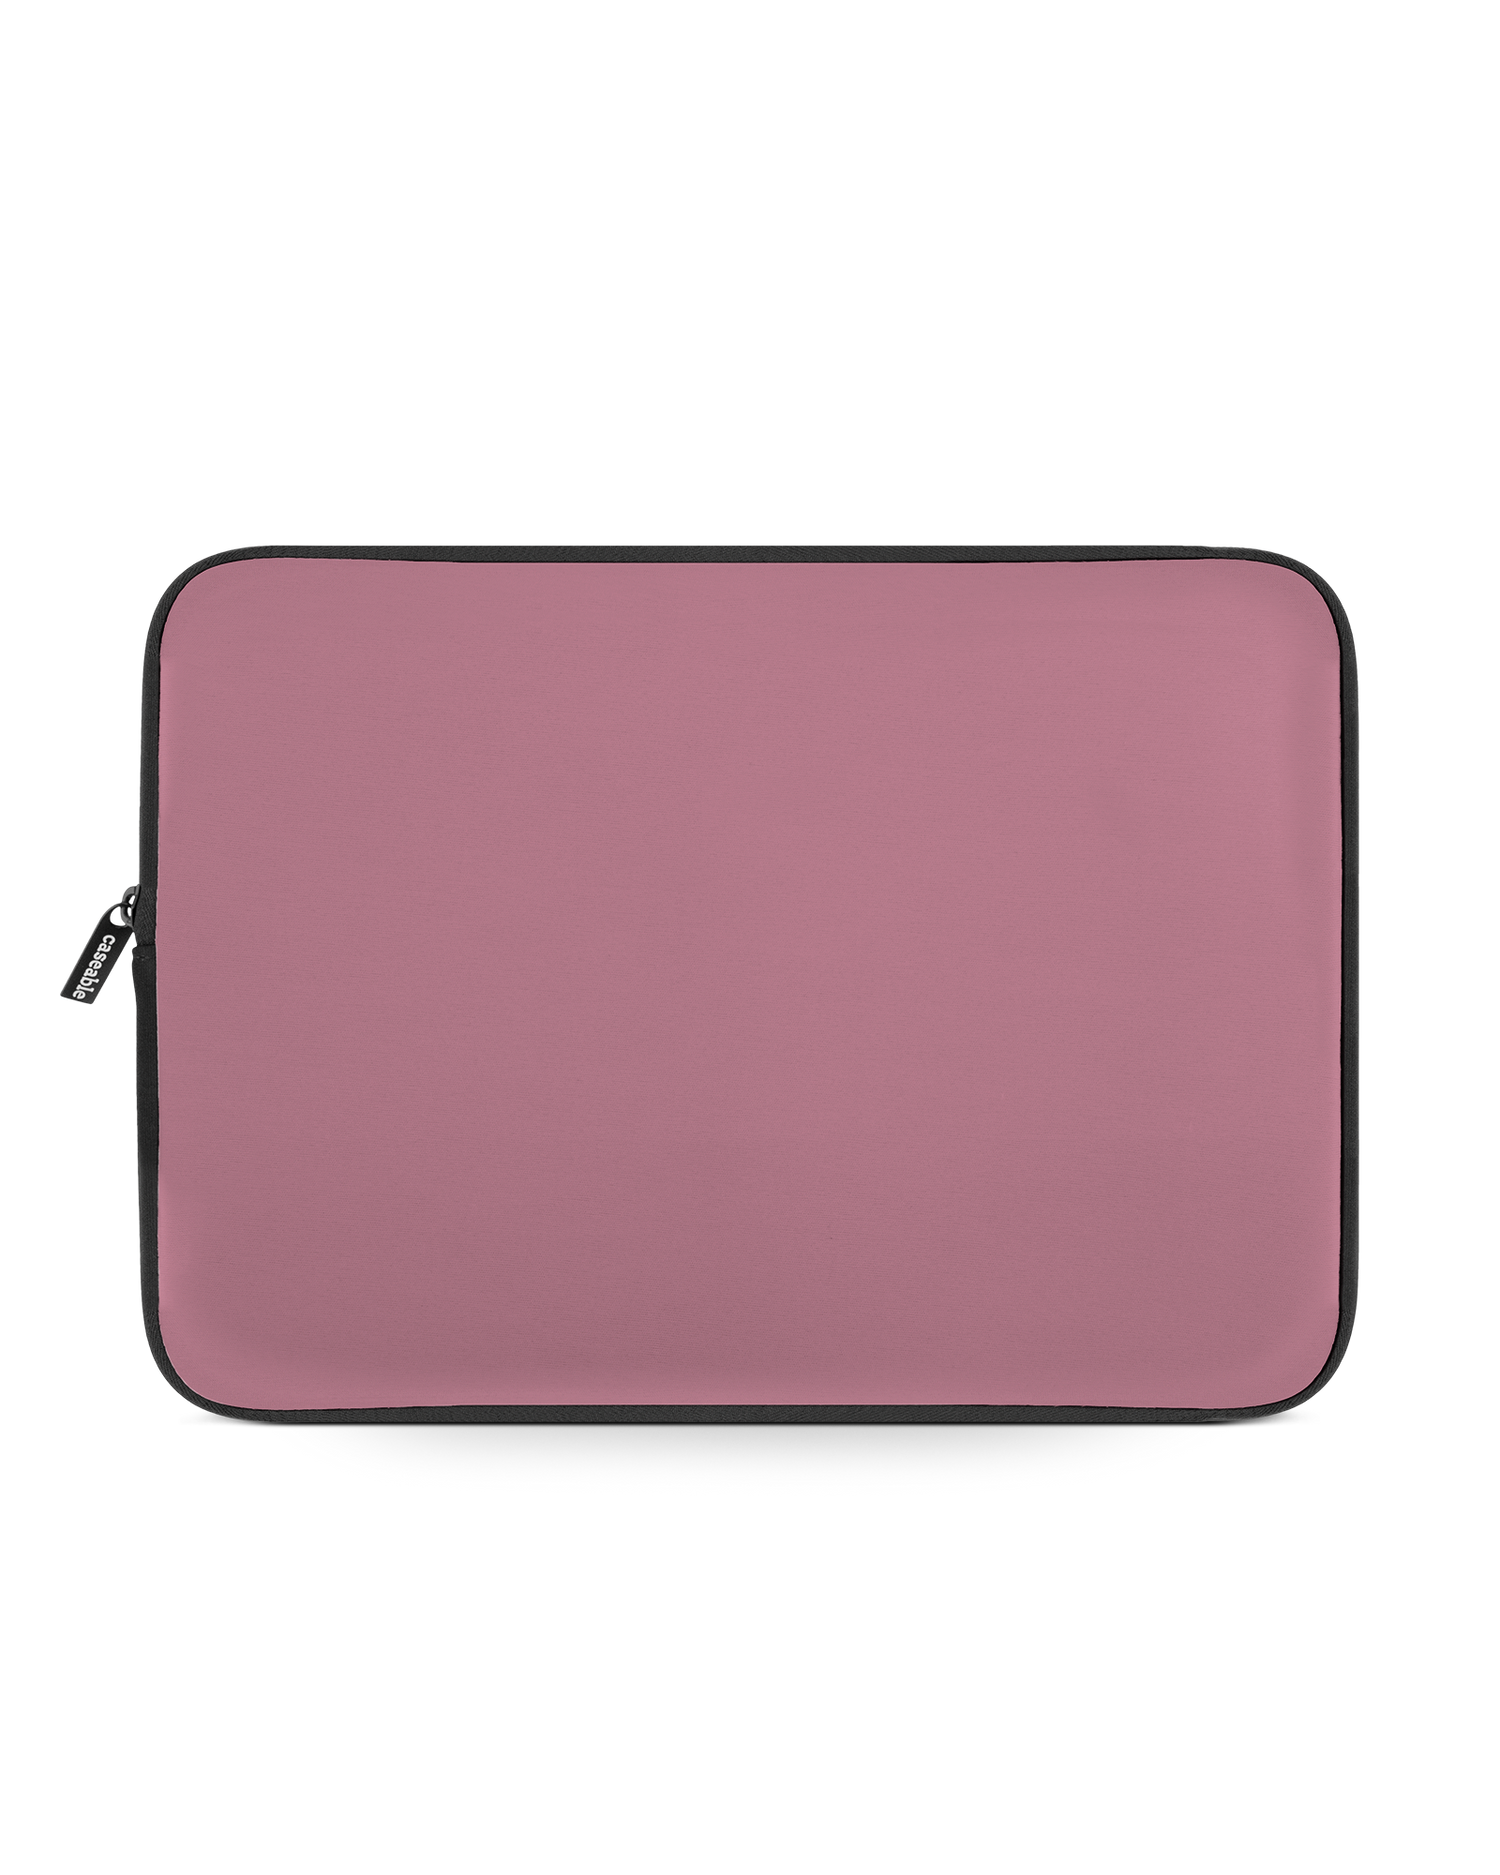 WILD ROSE Laptop Case 13-14 inch: Front View